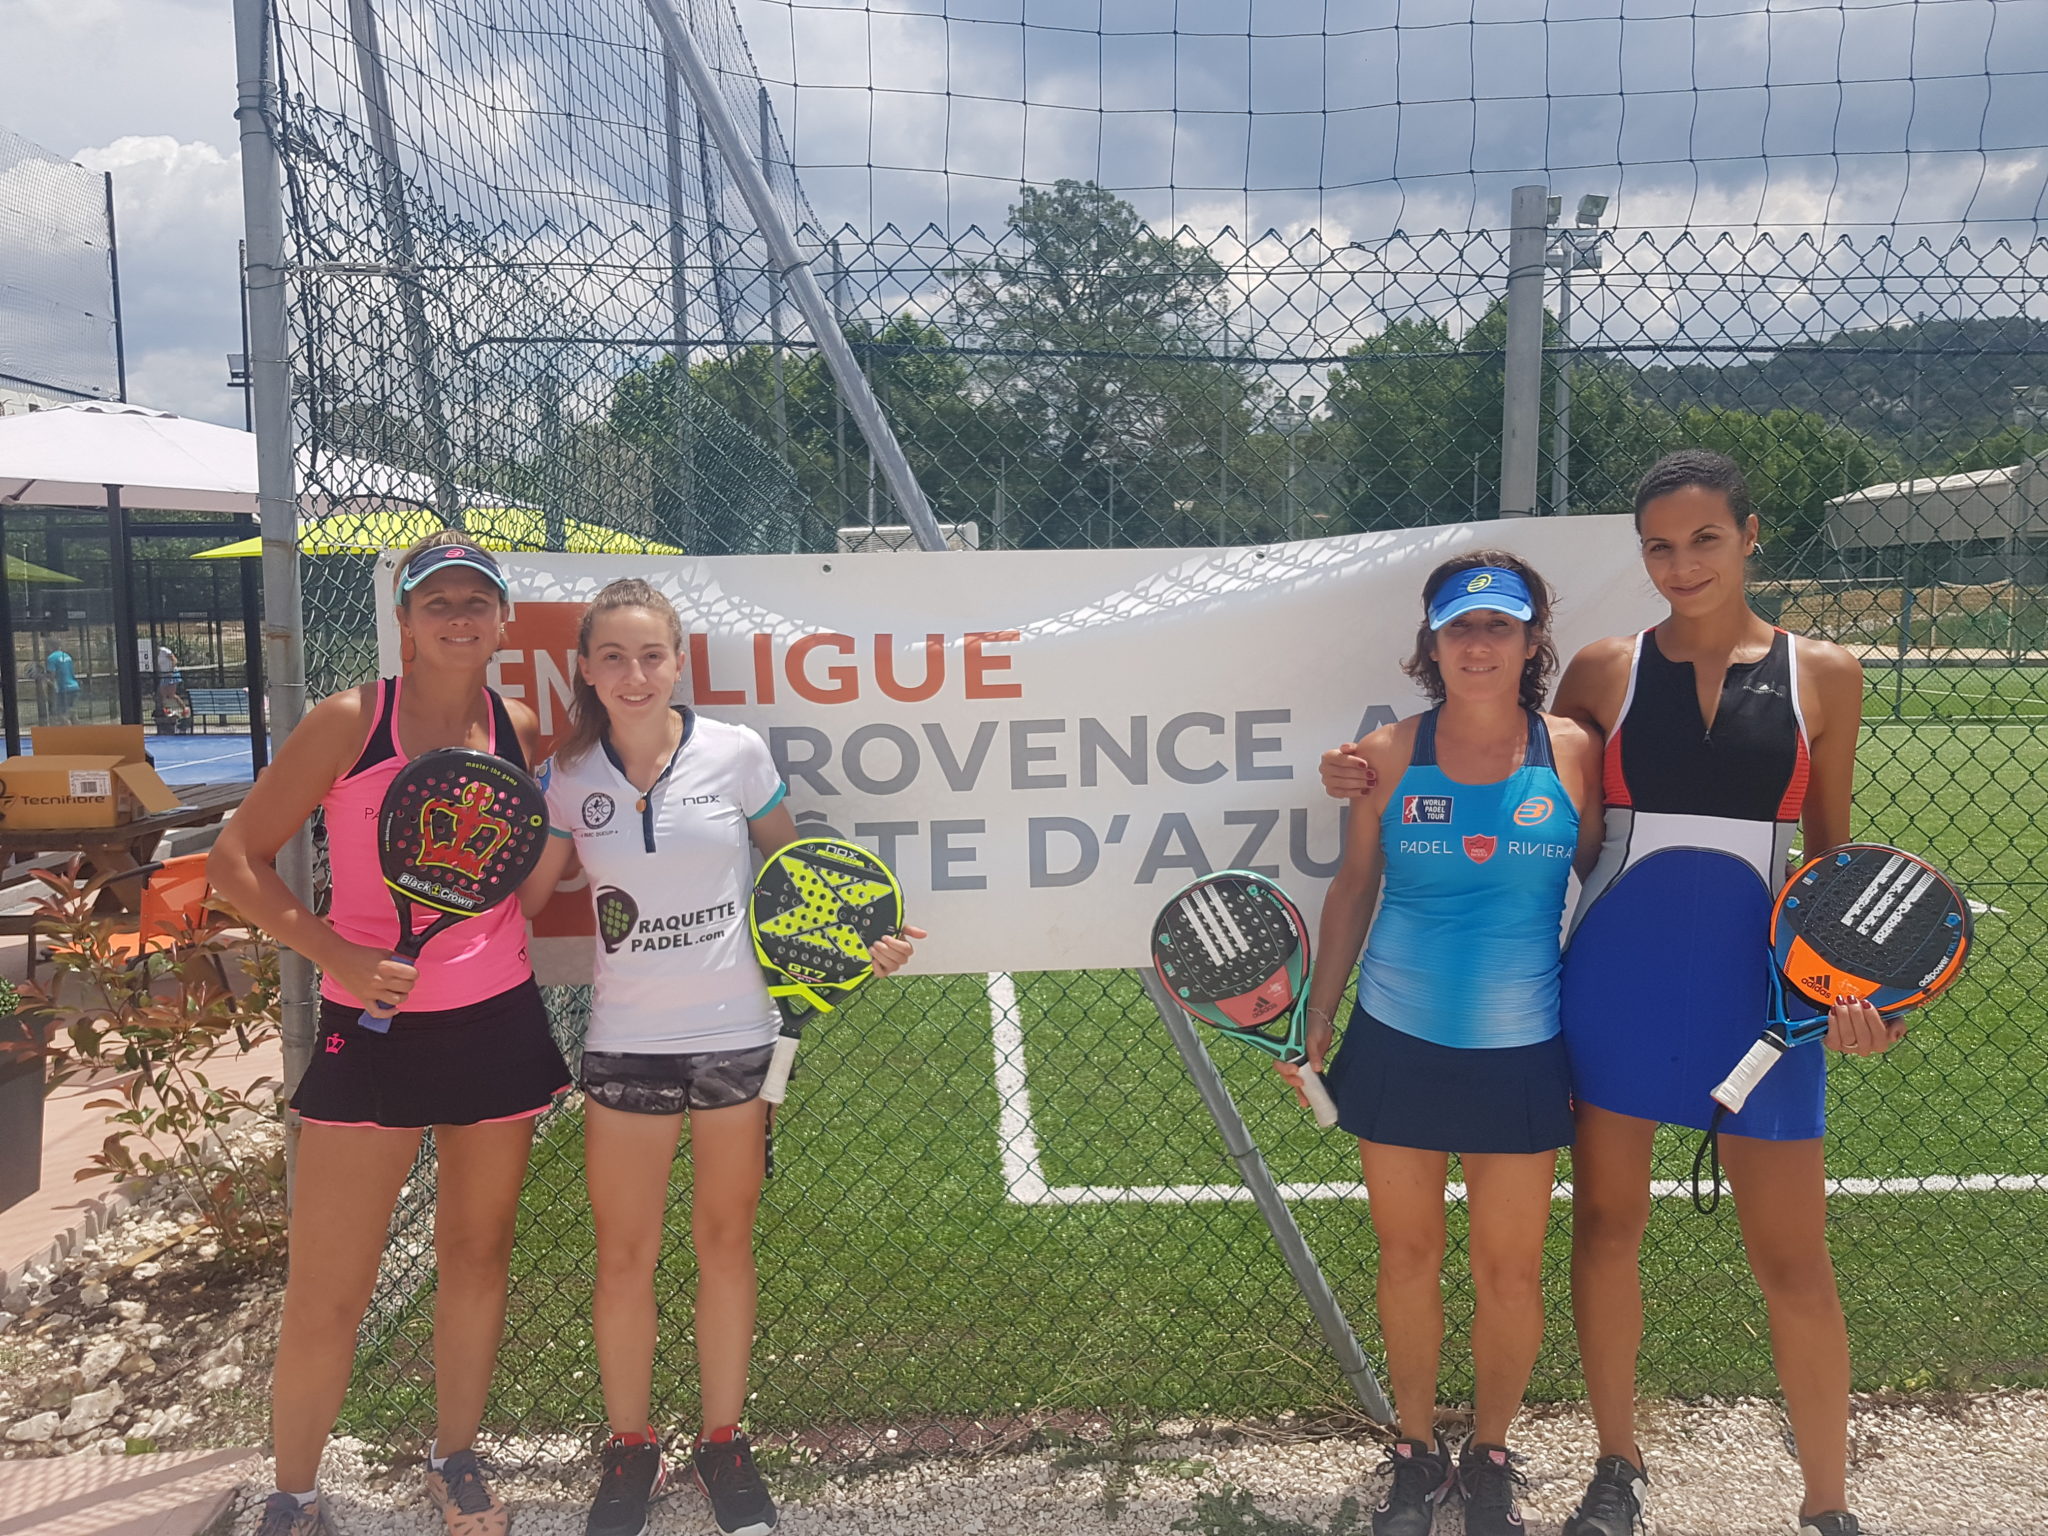 The PACA league continues its actions in the padel